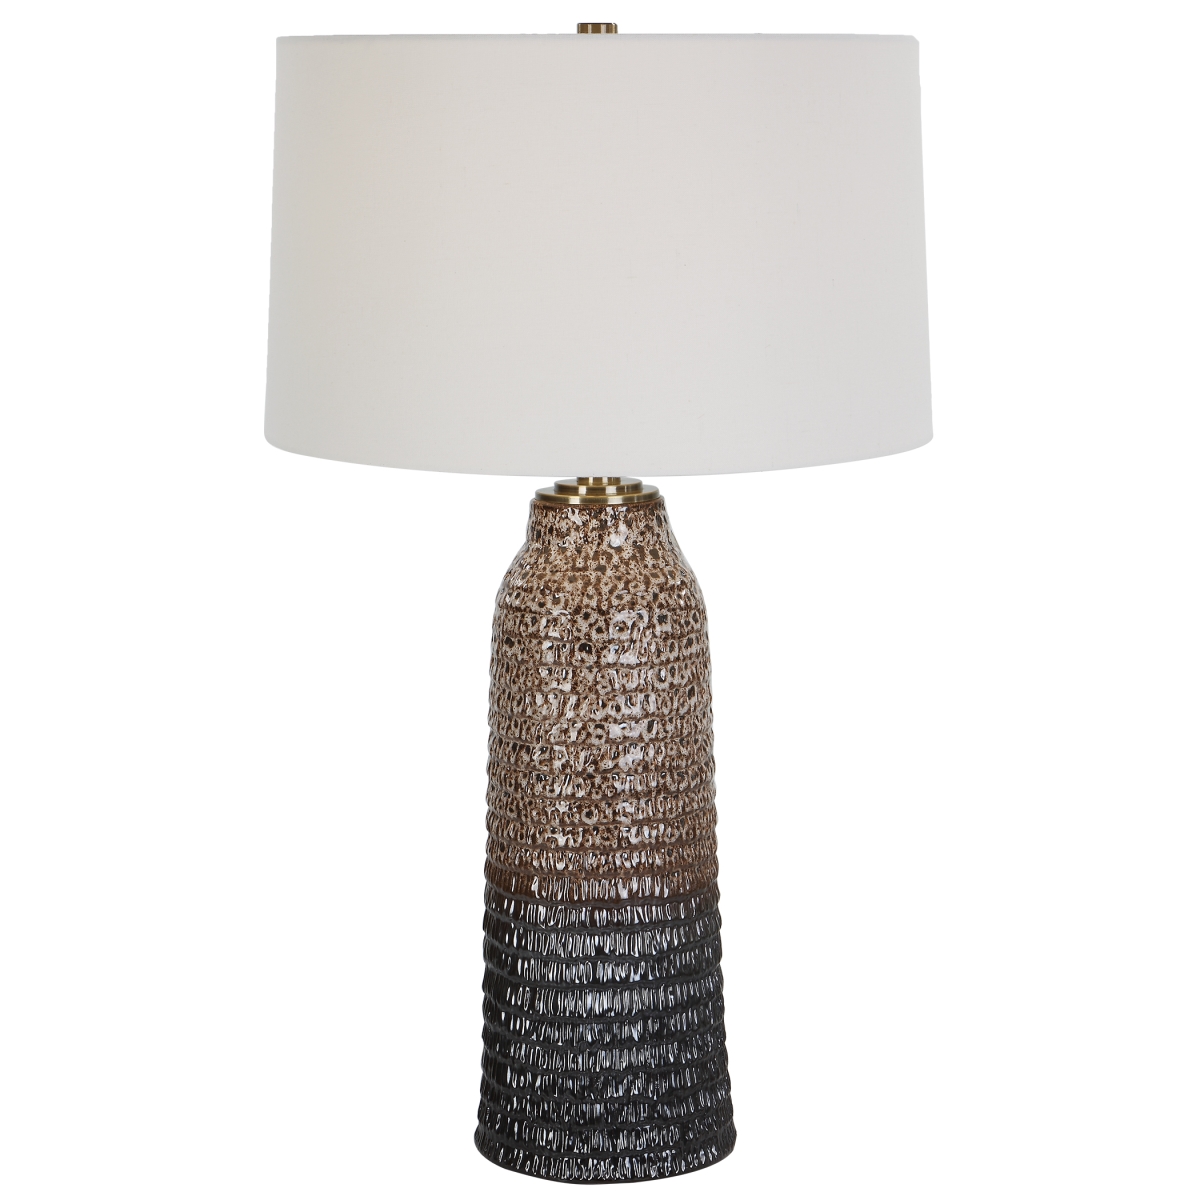 30167 31 in. 150W Padma Mottled Aged Ivory & Dark Chocolate with Brushed Brass Table Lamp -  Uttermost